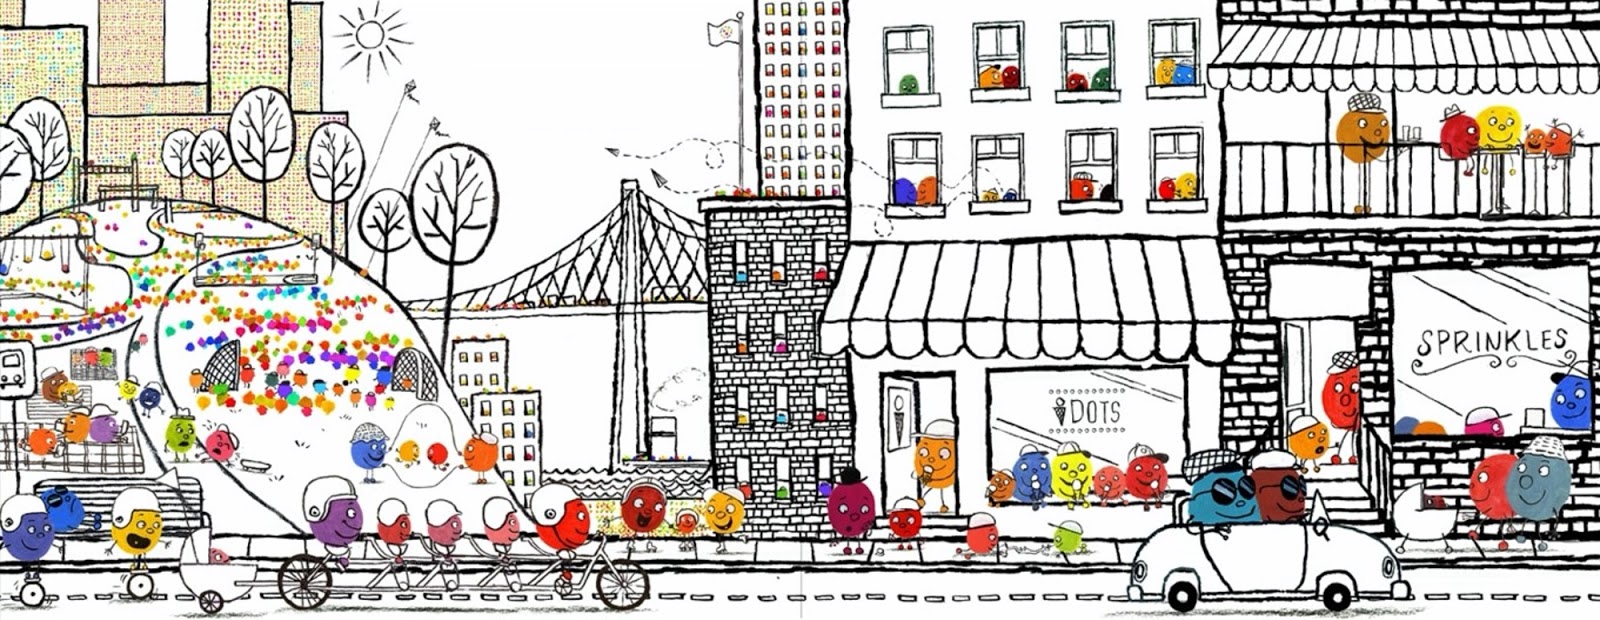 City scene with all different colored characters living together in harmony.